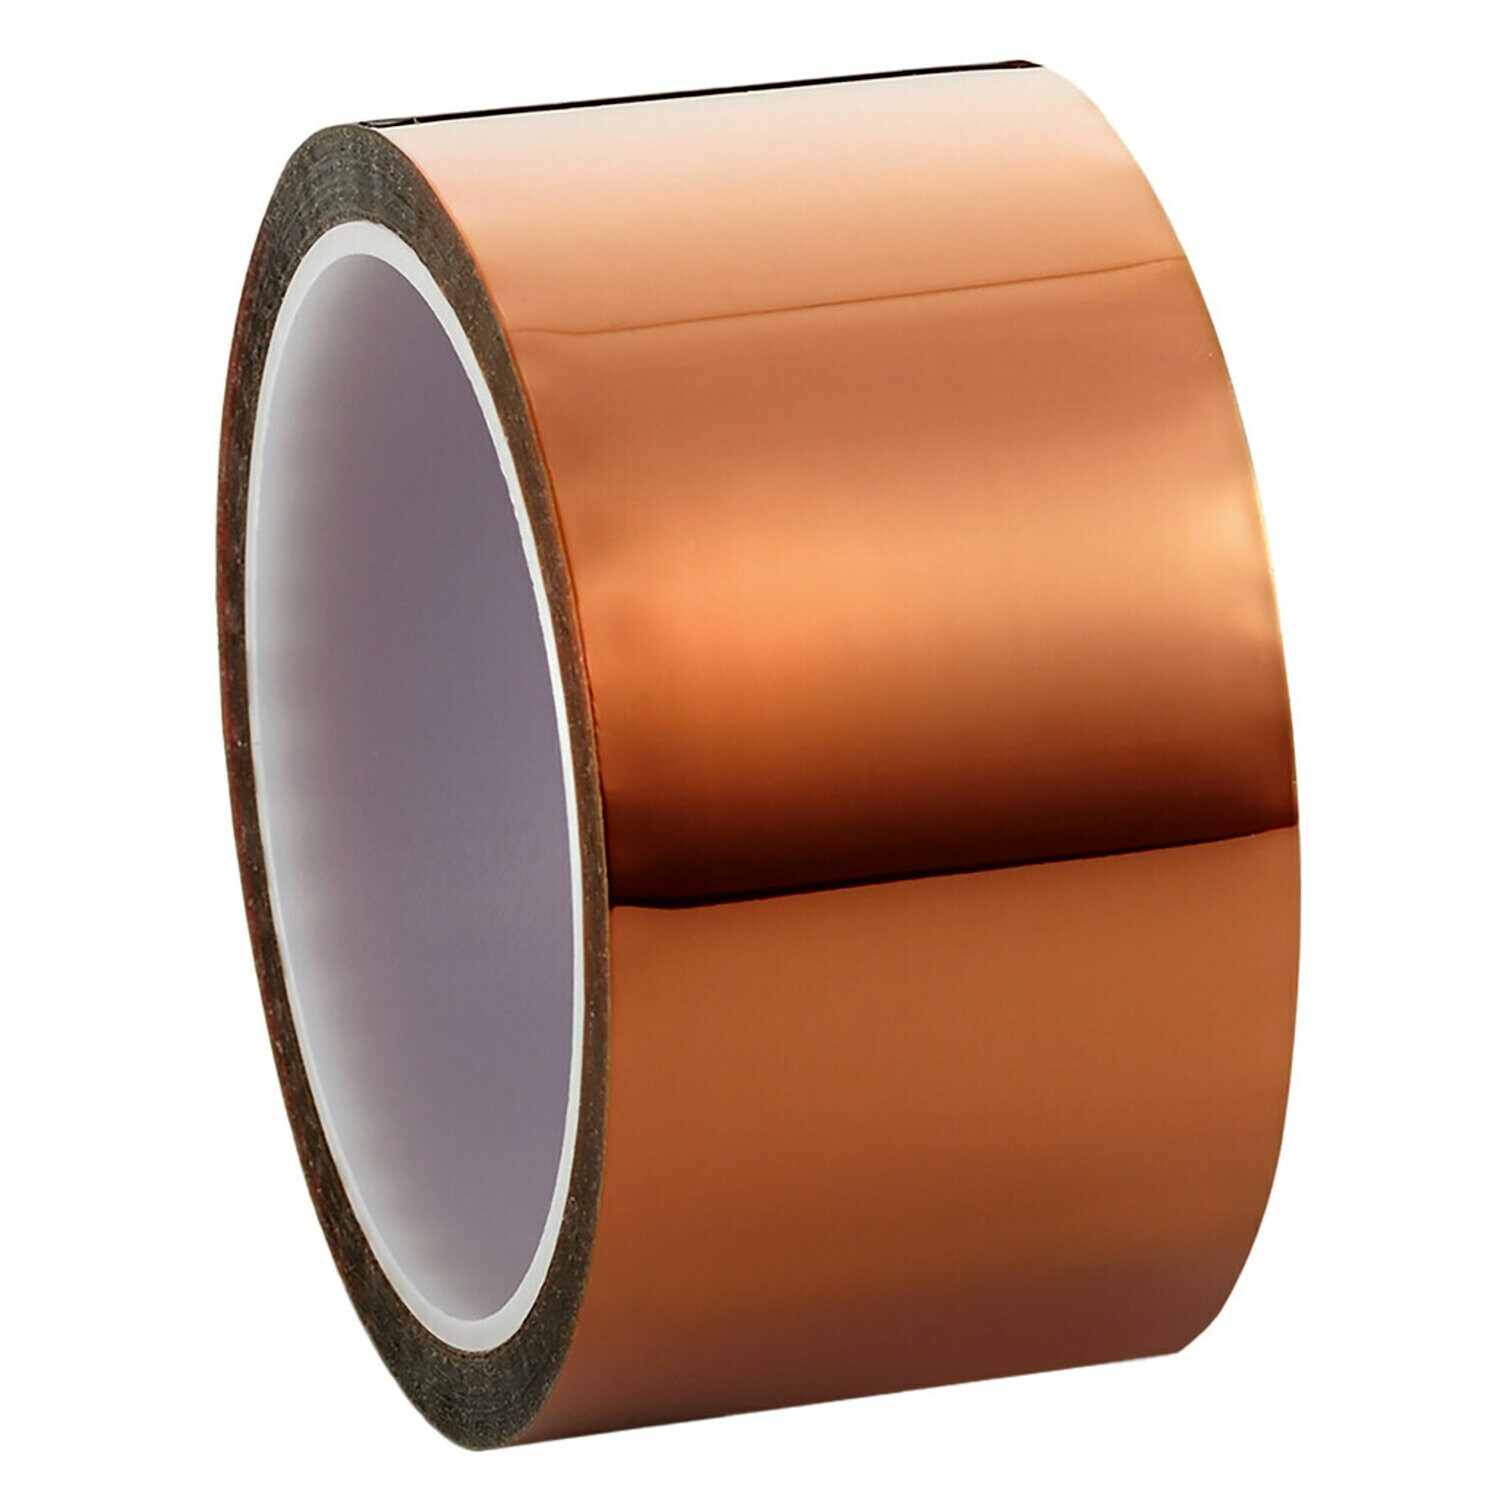 7100061139 - 3M Polyimide Tape 8997, Light Amber, 2 in x 36 yd, 2.2 mil, 24 rolls
per case